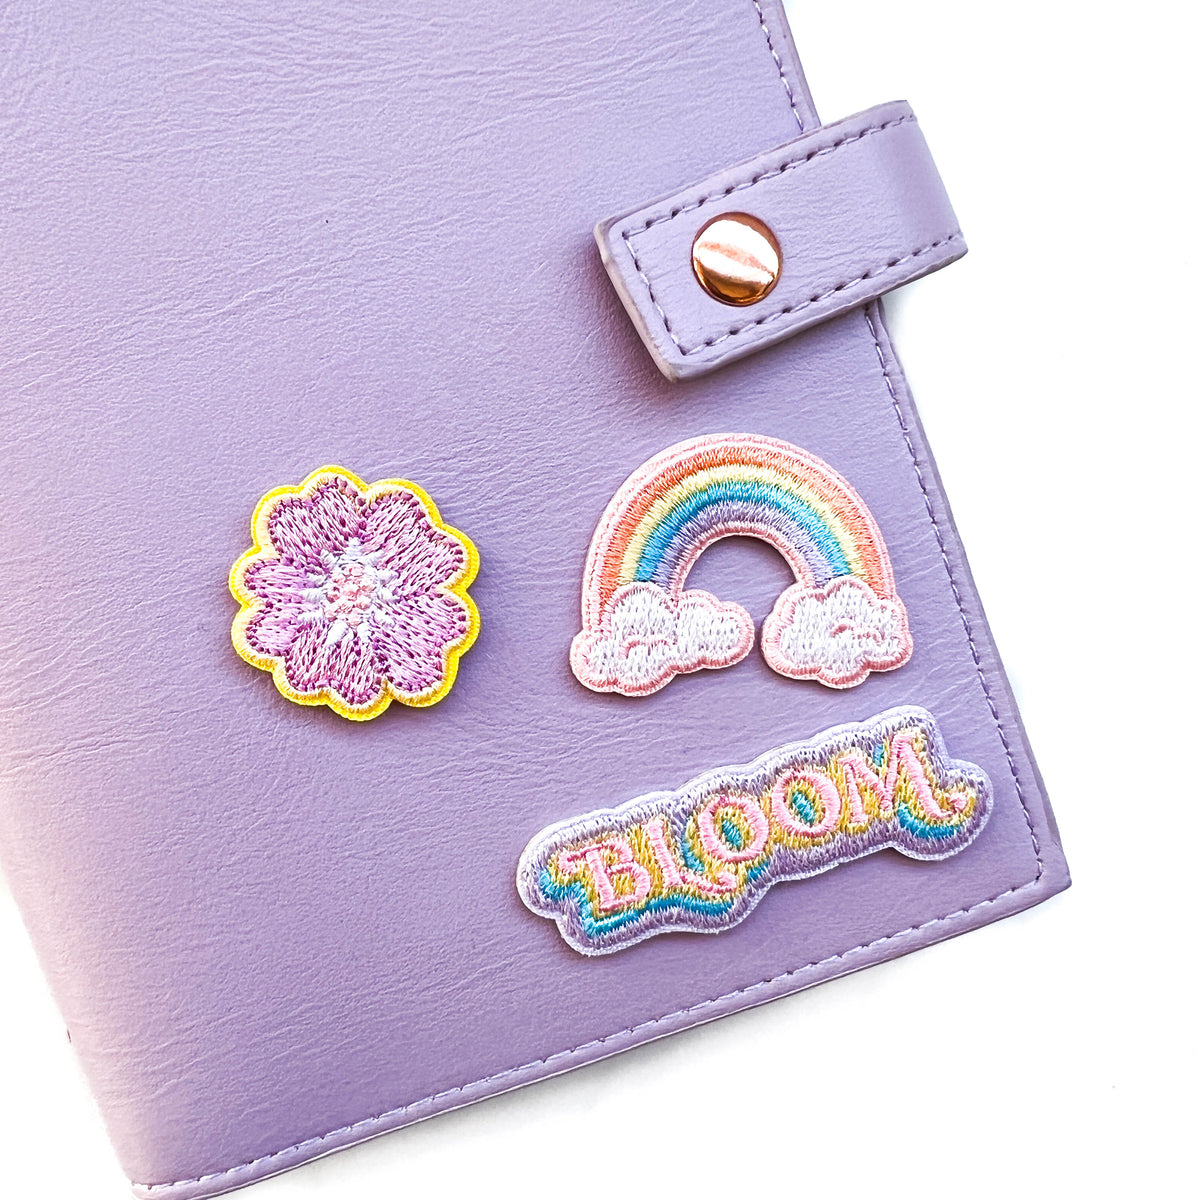 In Bloom Embroidered Adhesive Patches